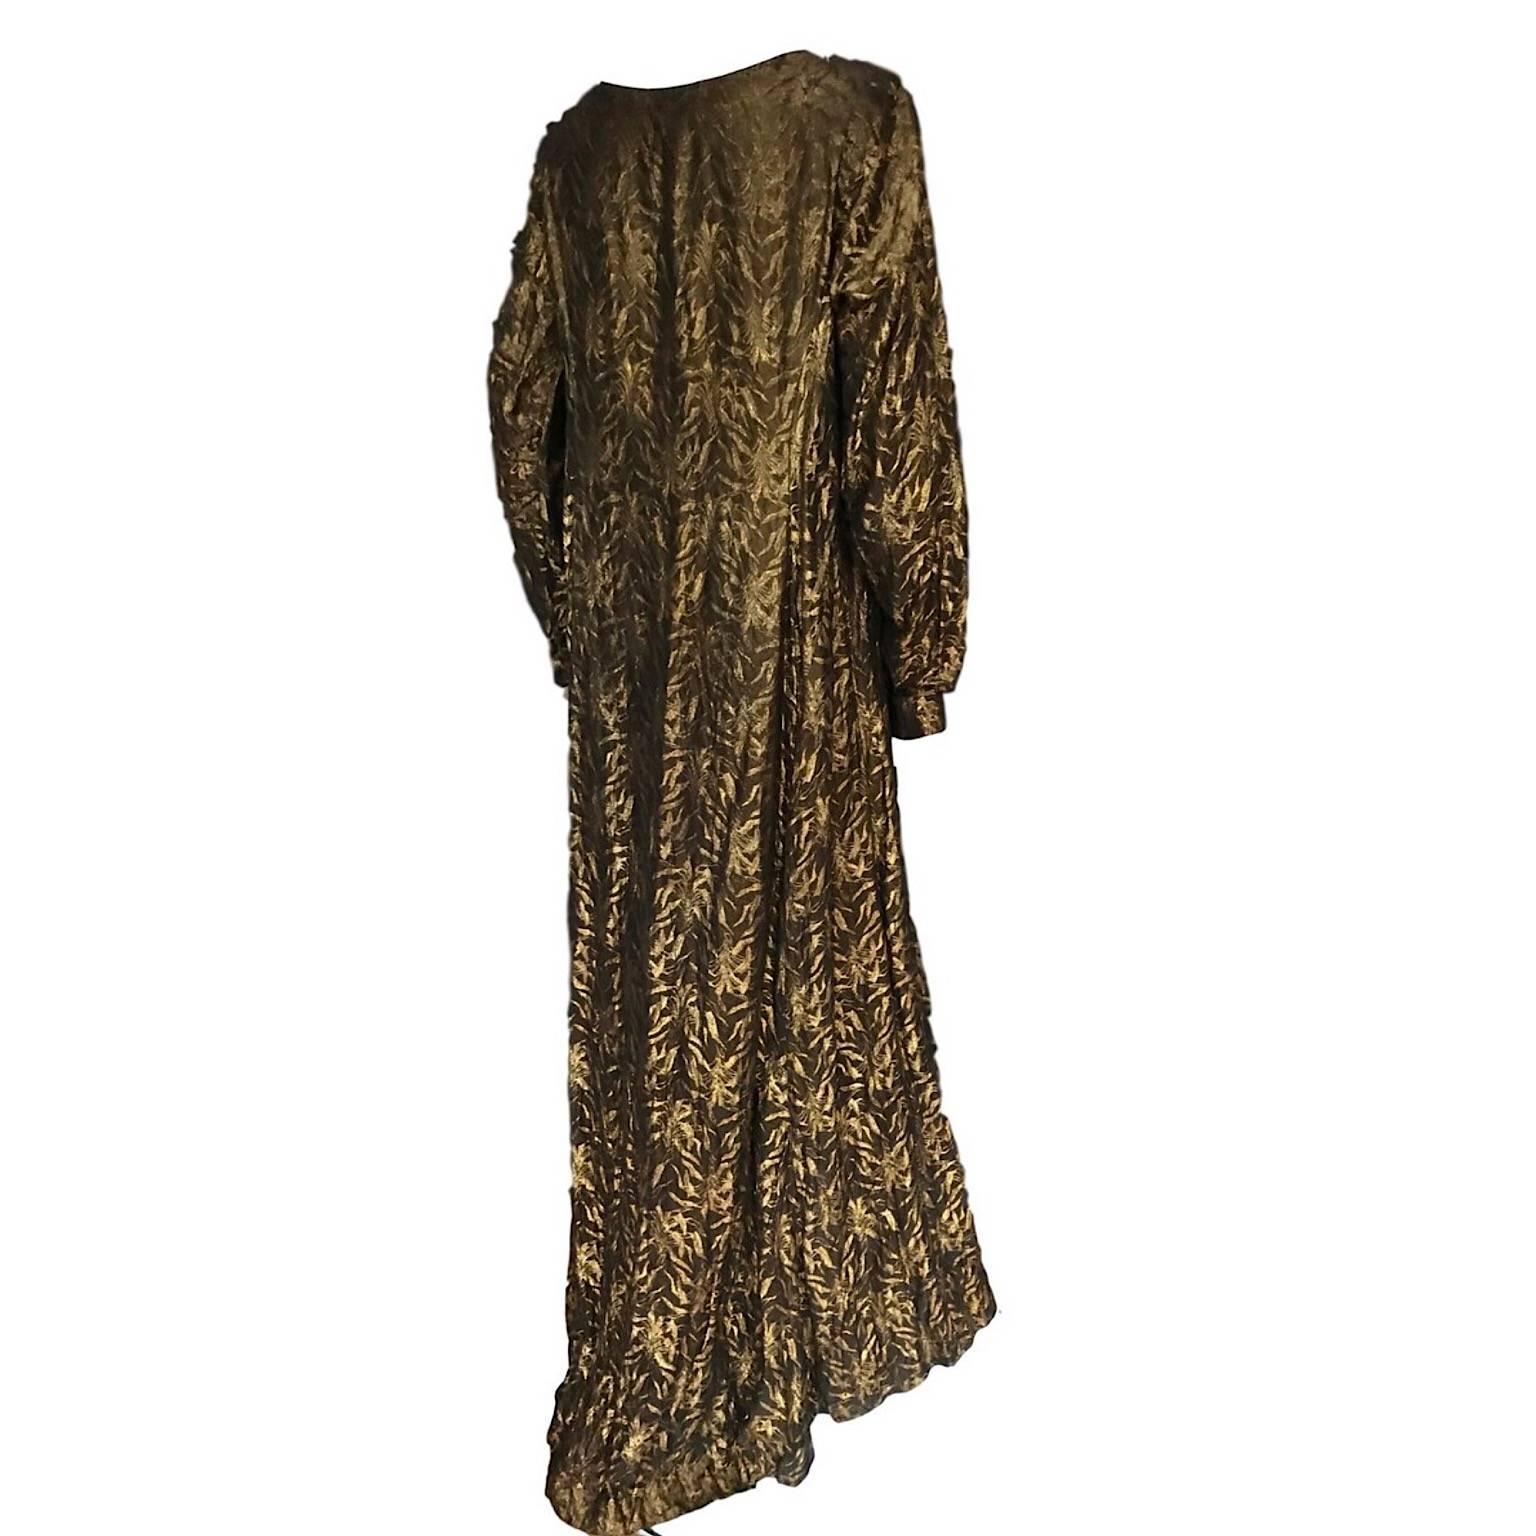 
Harvey Nichols 1930s Gold Lamé damask full length dress, with a repeating leaf design, long fitted sleeves with cuff buttons, slight shoulder pads and a slight train/longer length at back. Inner weight on the front upper bust for the neck line